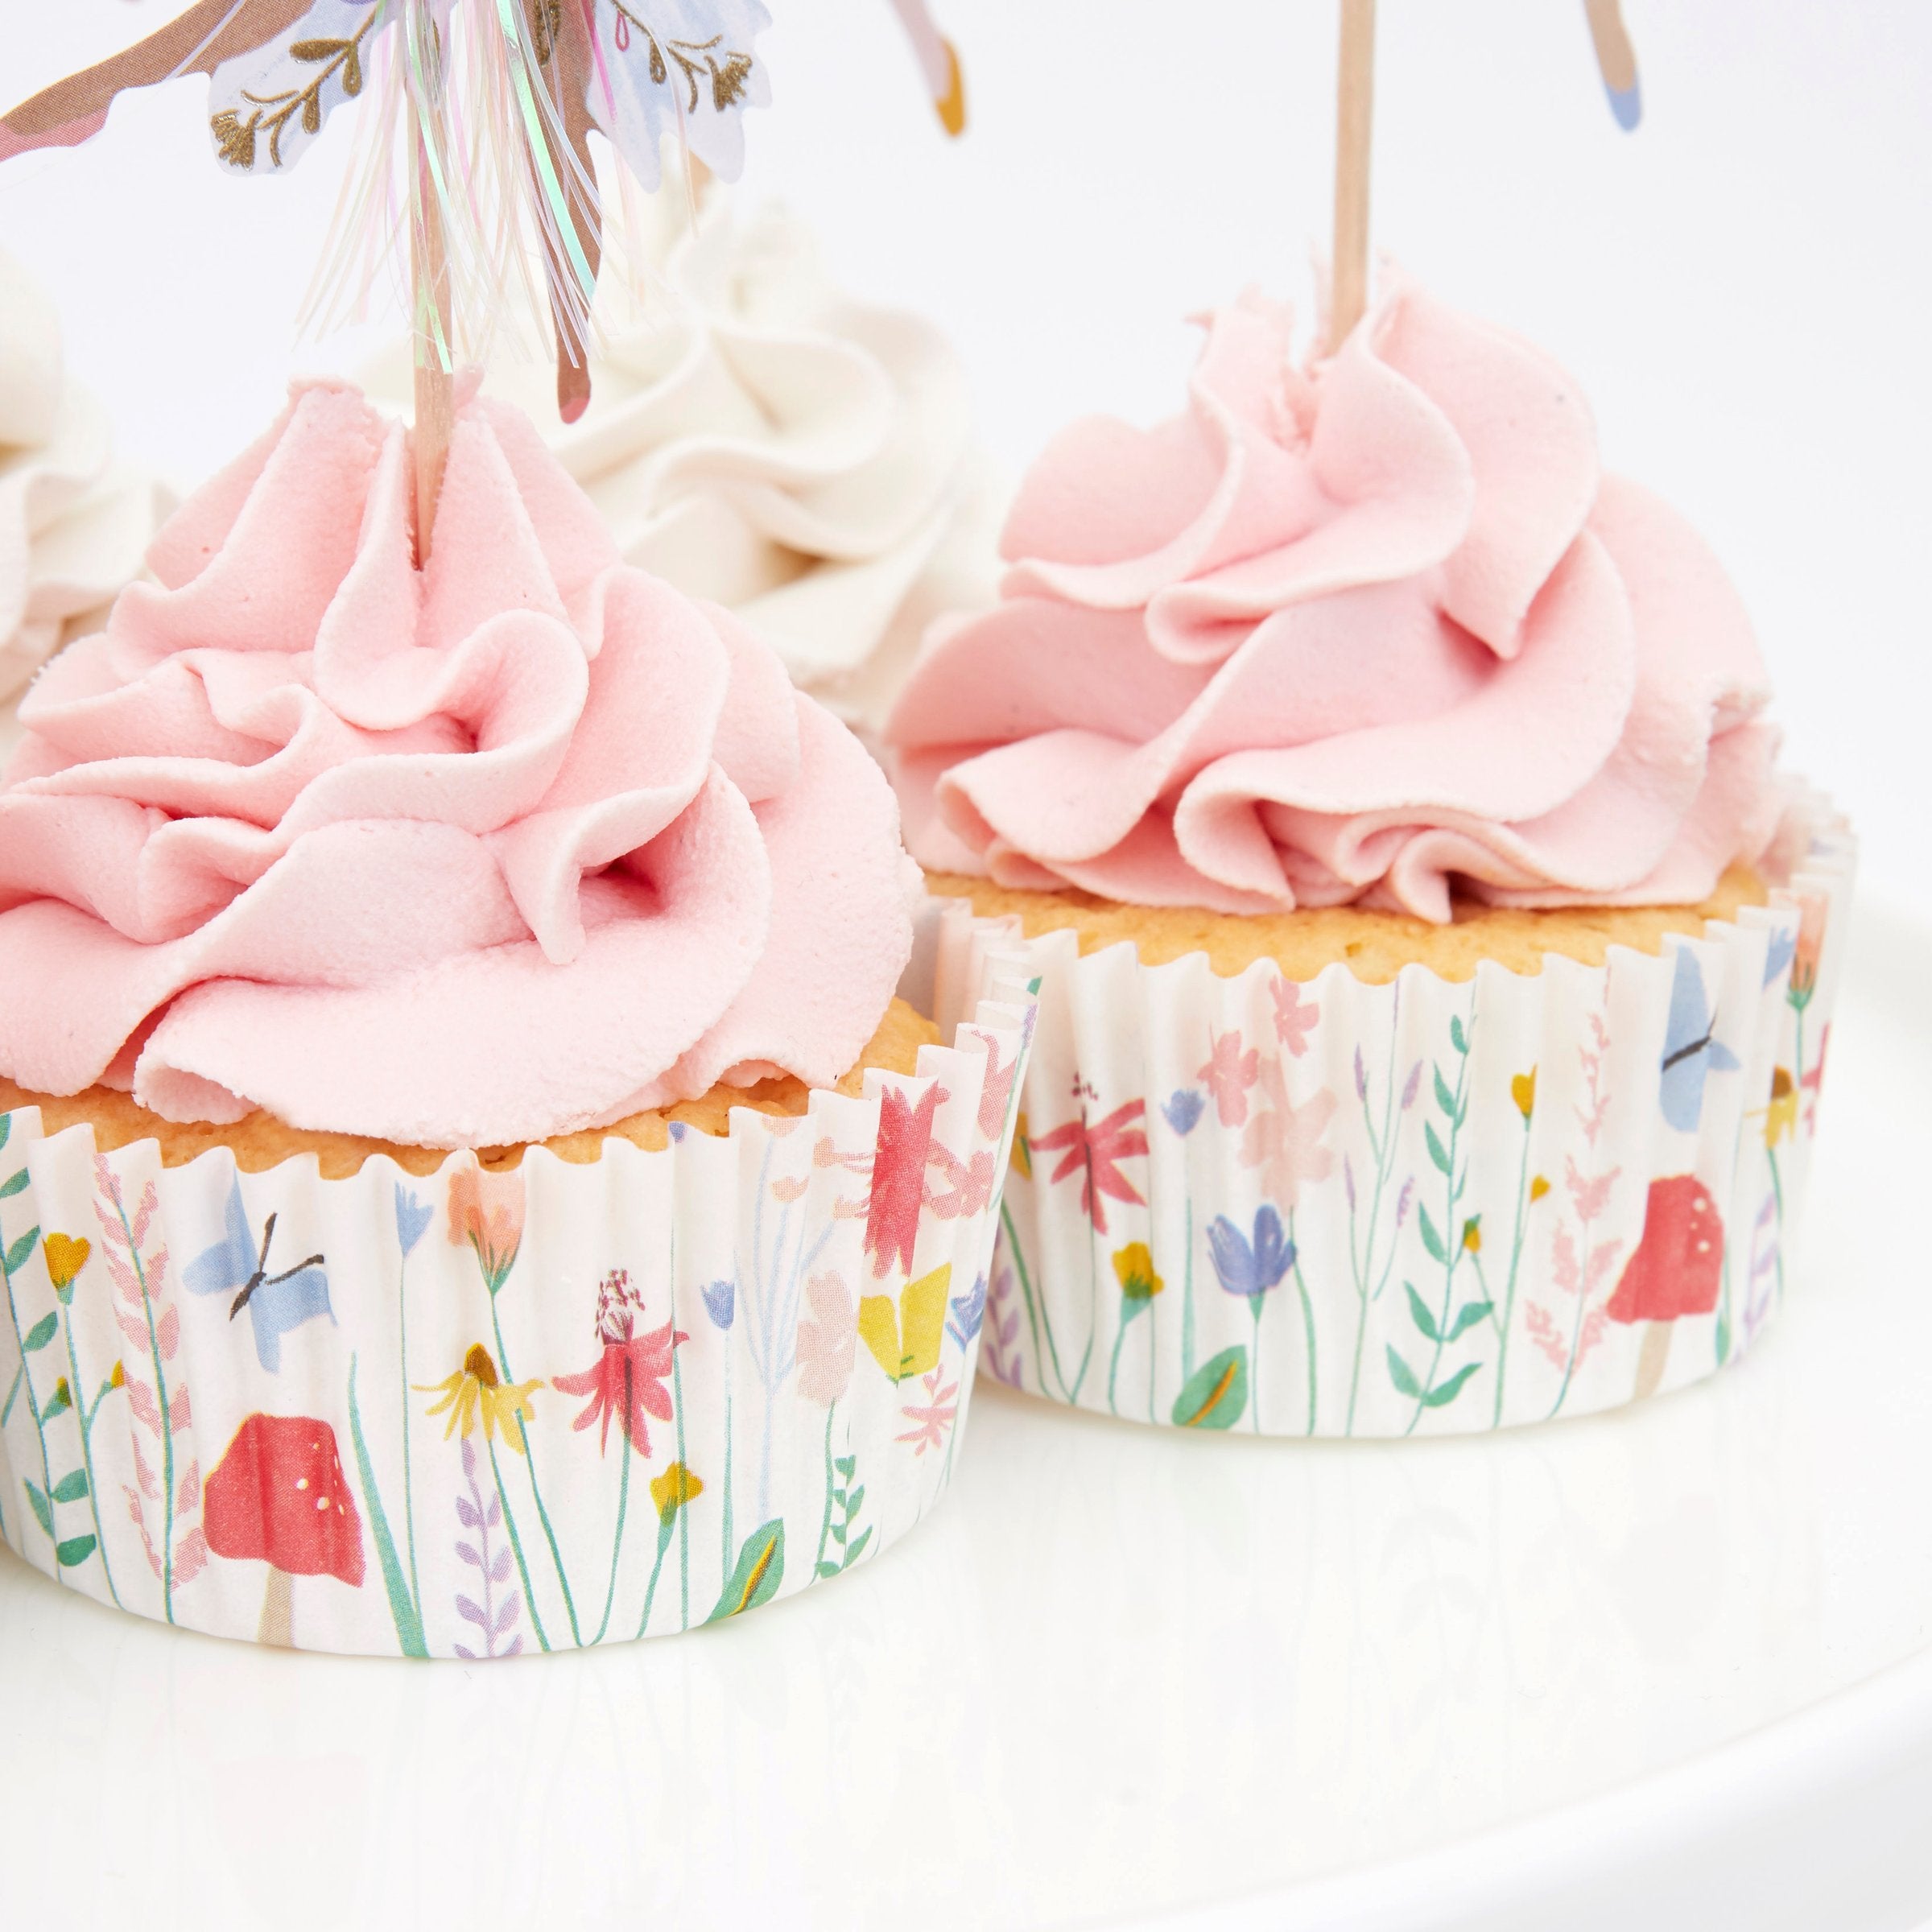 Fairy Cupcake Toppers